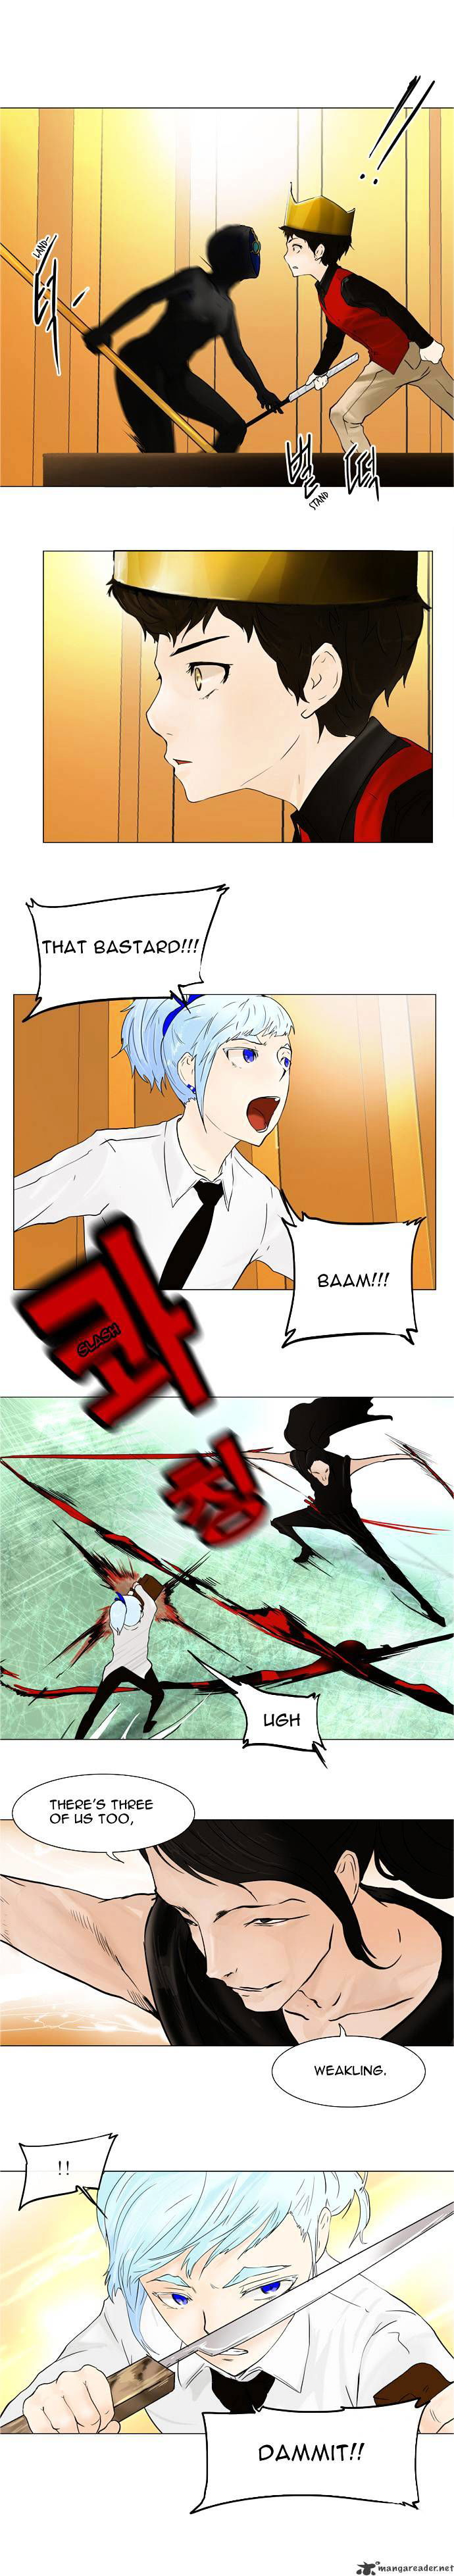 Tower of God Chapter 24 page 5